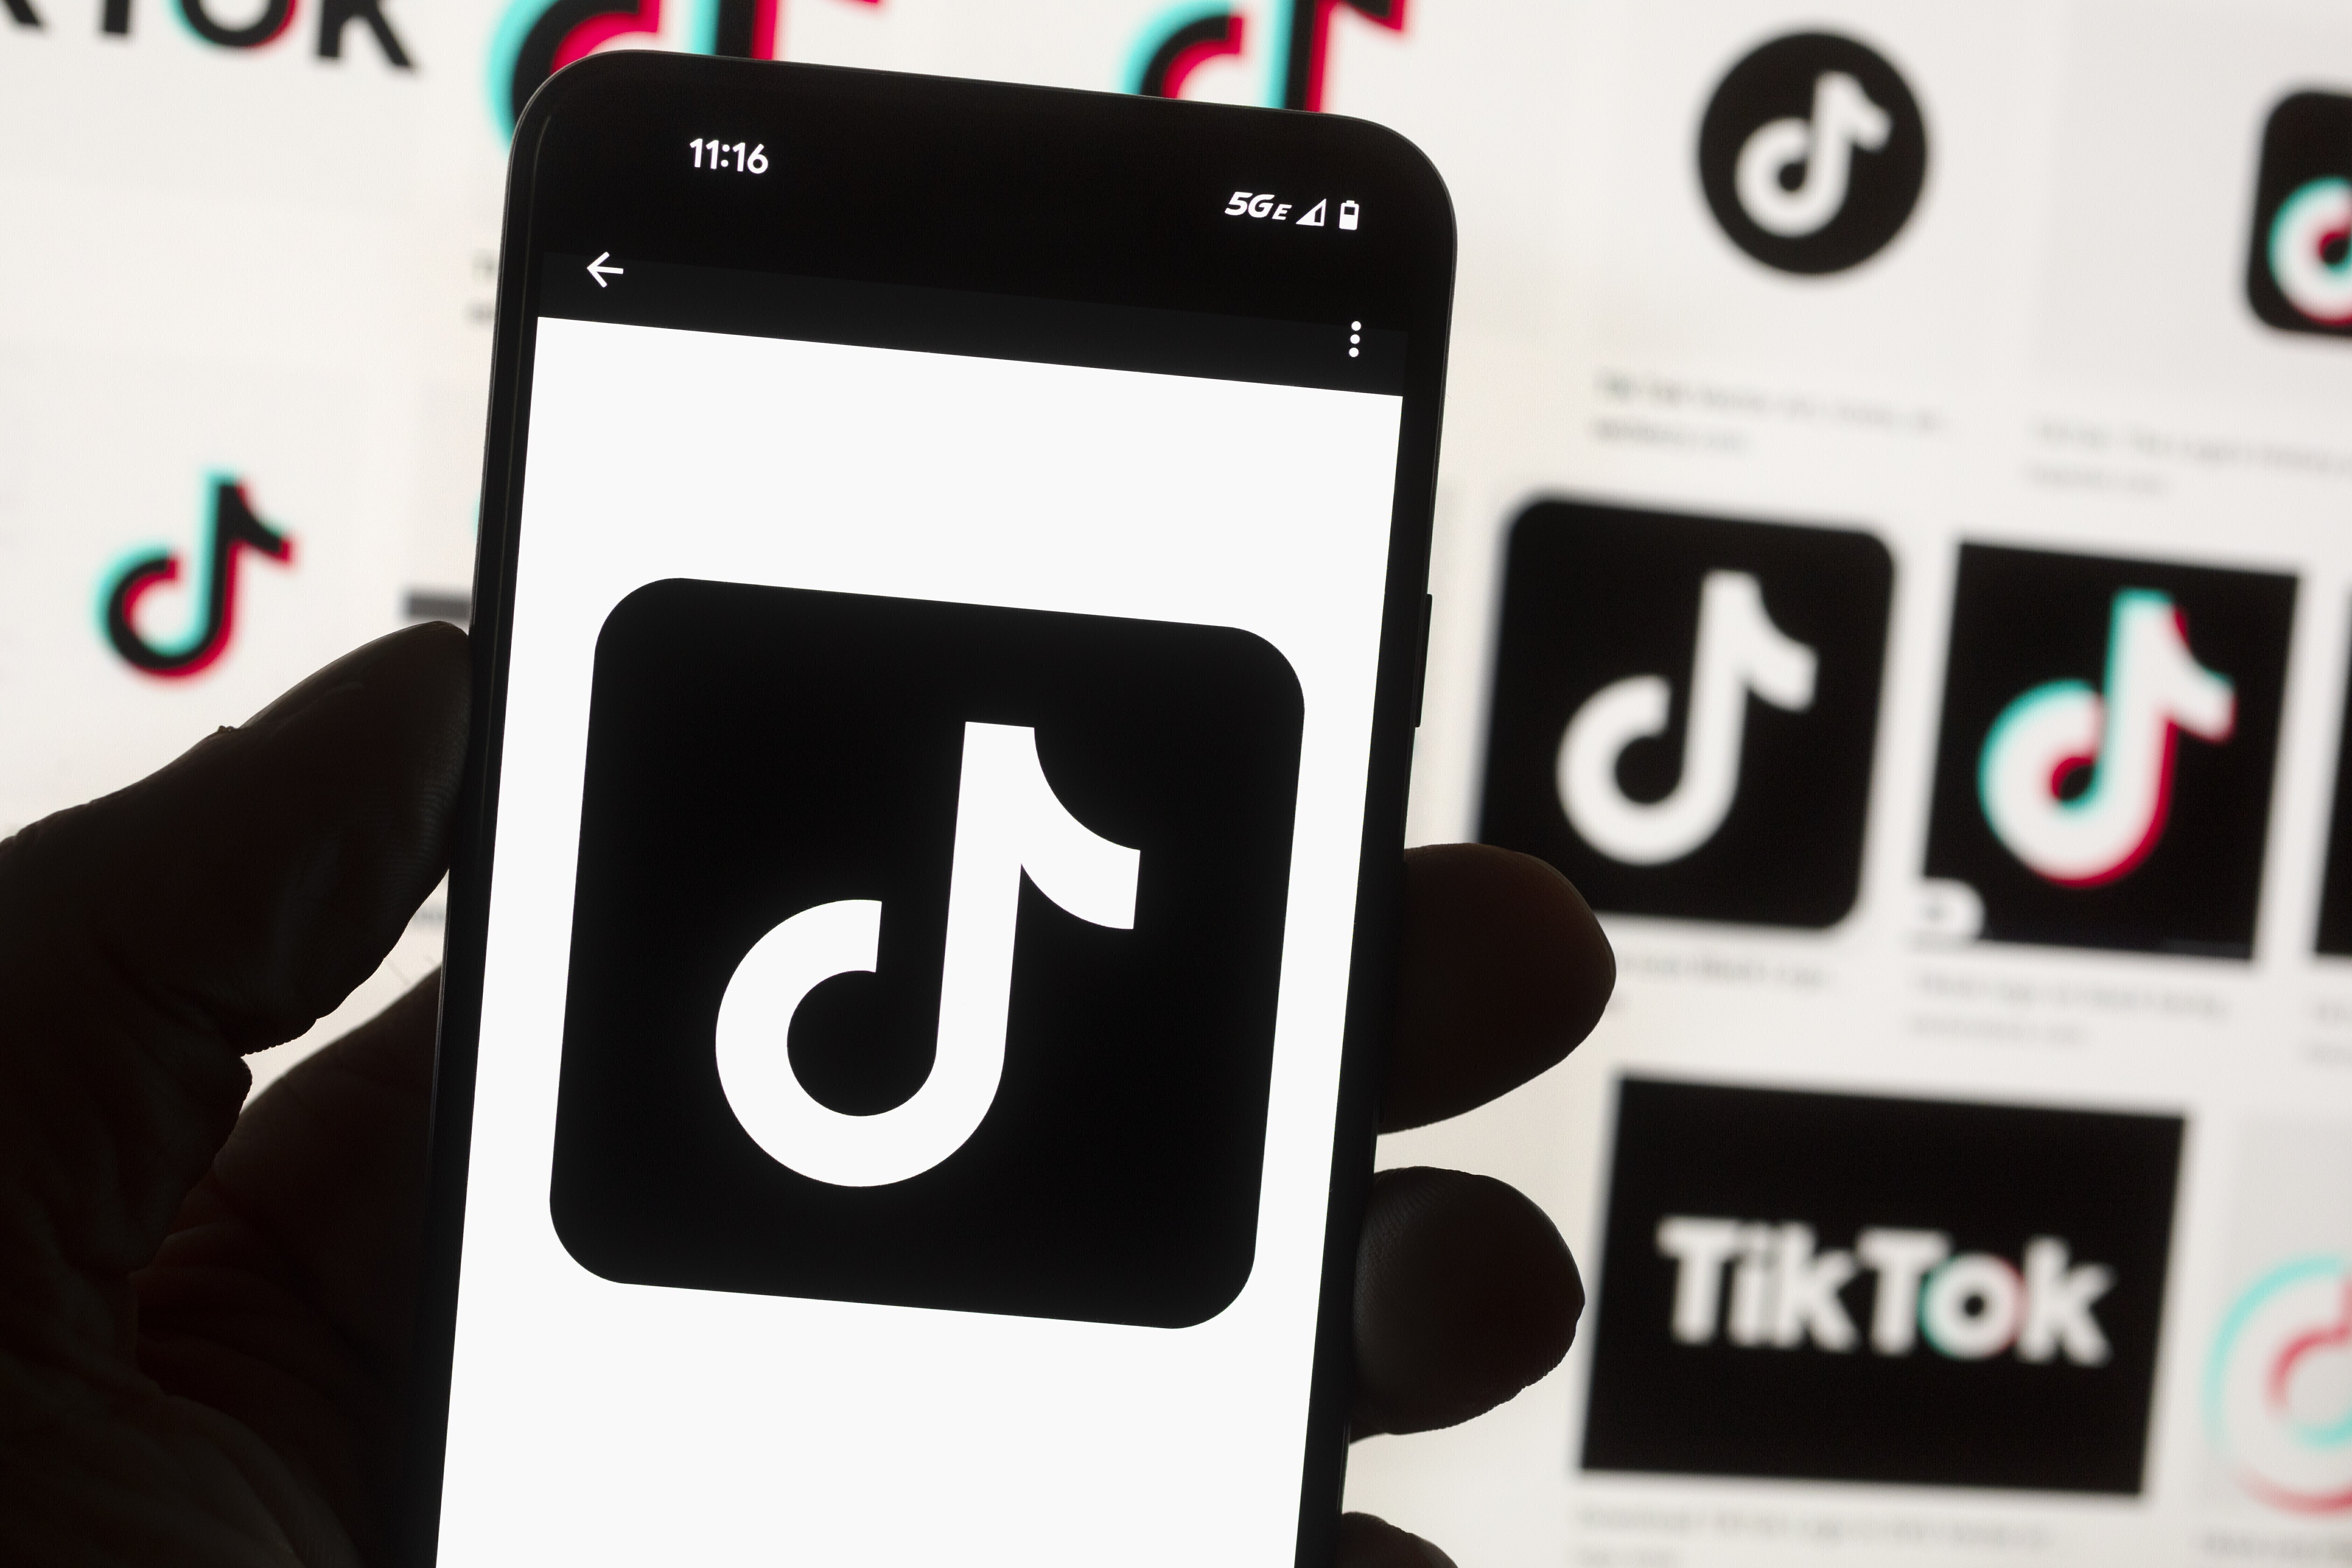 Possible TikTok ban in U.S. looms after Biden signs bill, setting up
legal fight